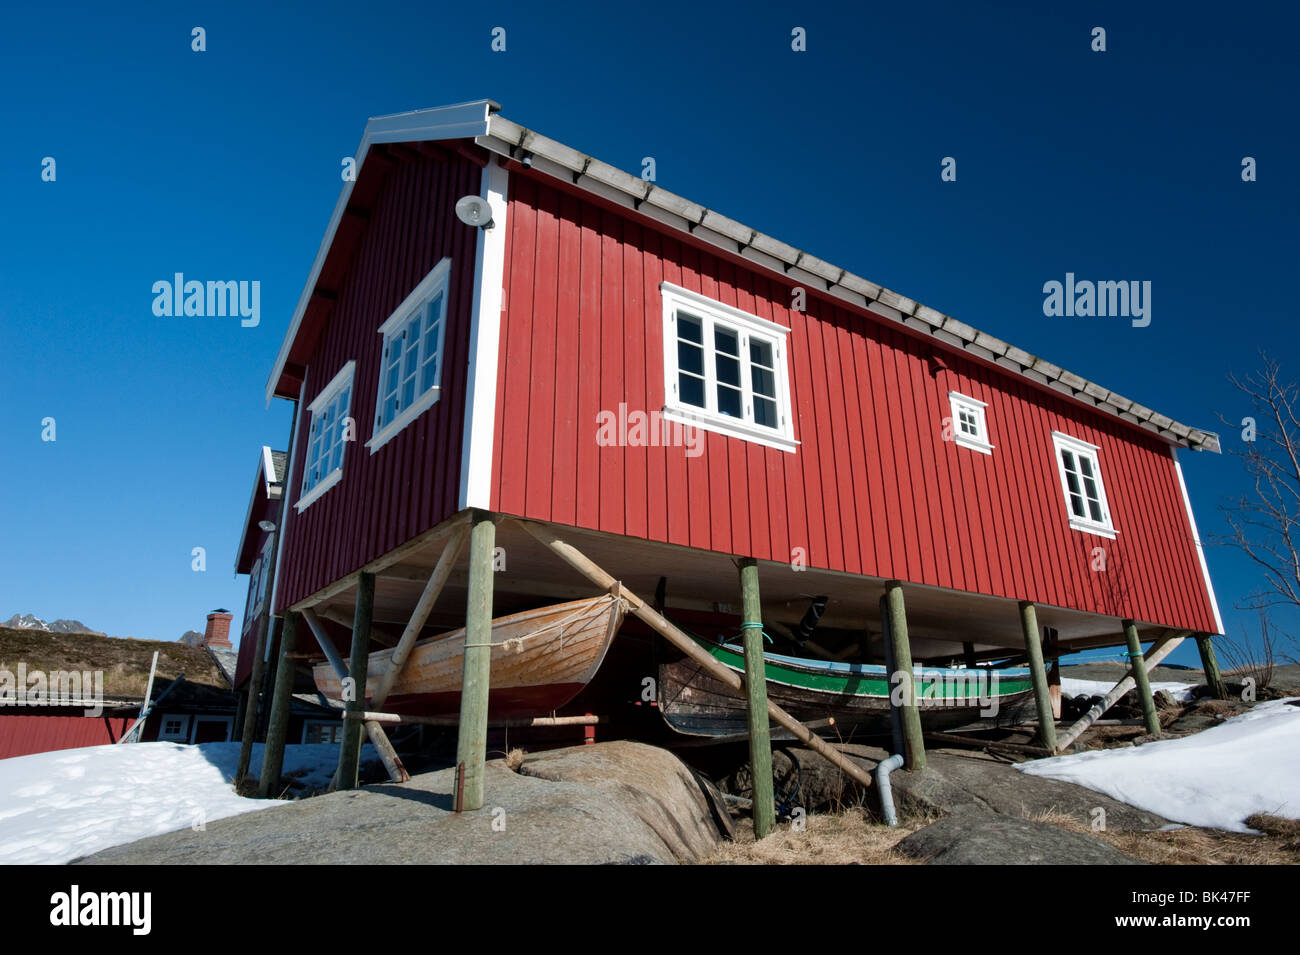 Traditional red wooden Rorbu fisherman`s hut with fishing boats stored below in village of Reine in Lofoten Islands in Norway Stock Photo